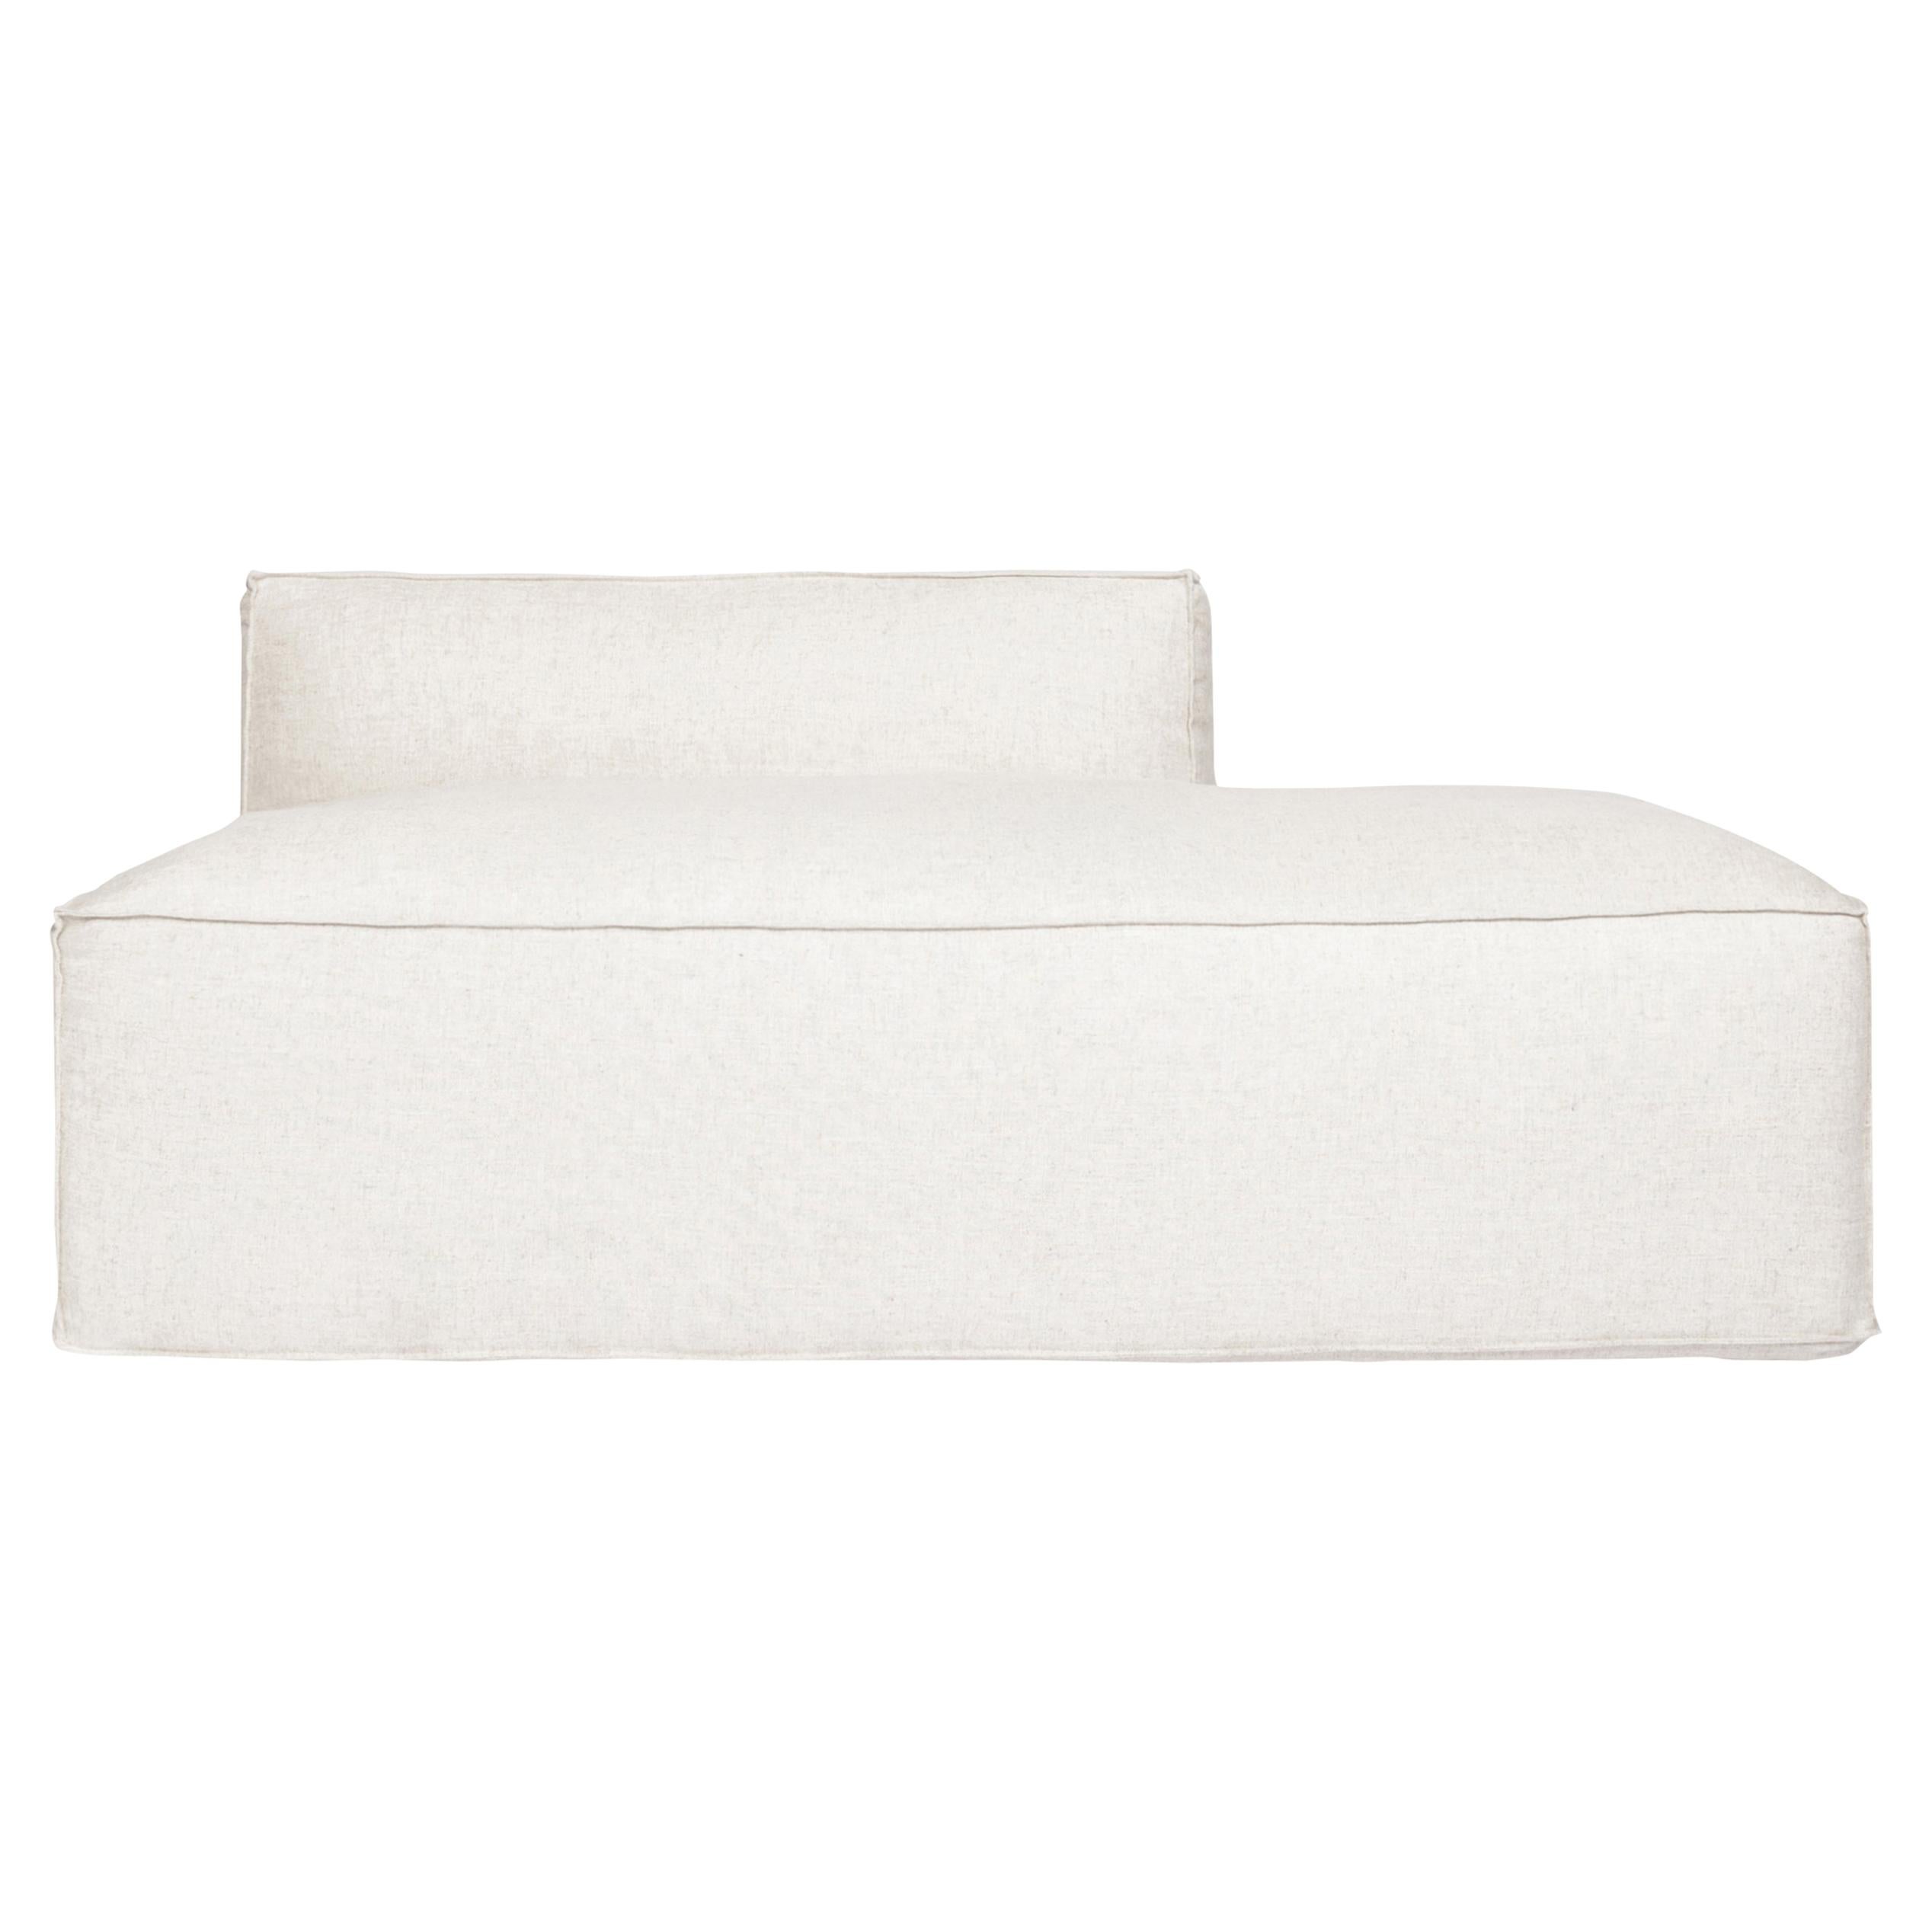 Arena Chaise Longue Module for Sofa in Linen Color Fabric Upholstery